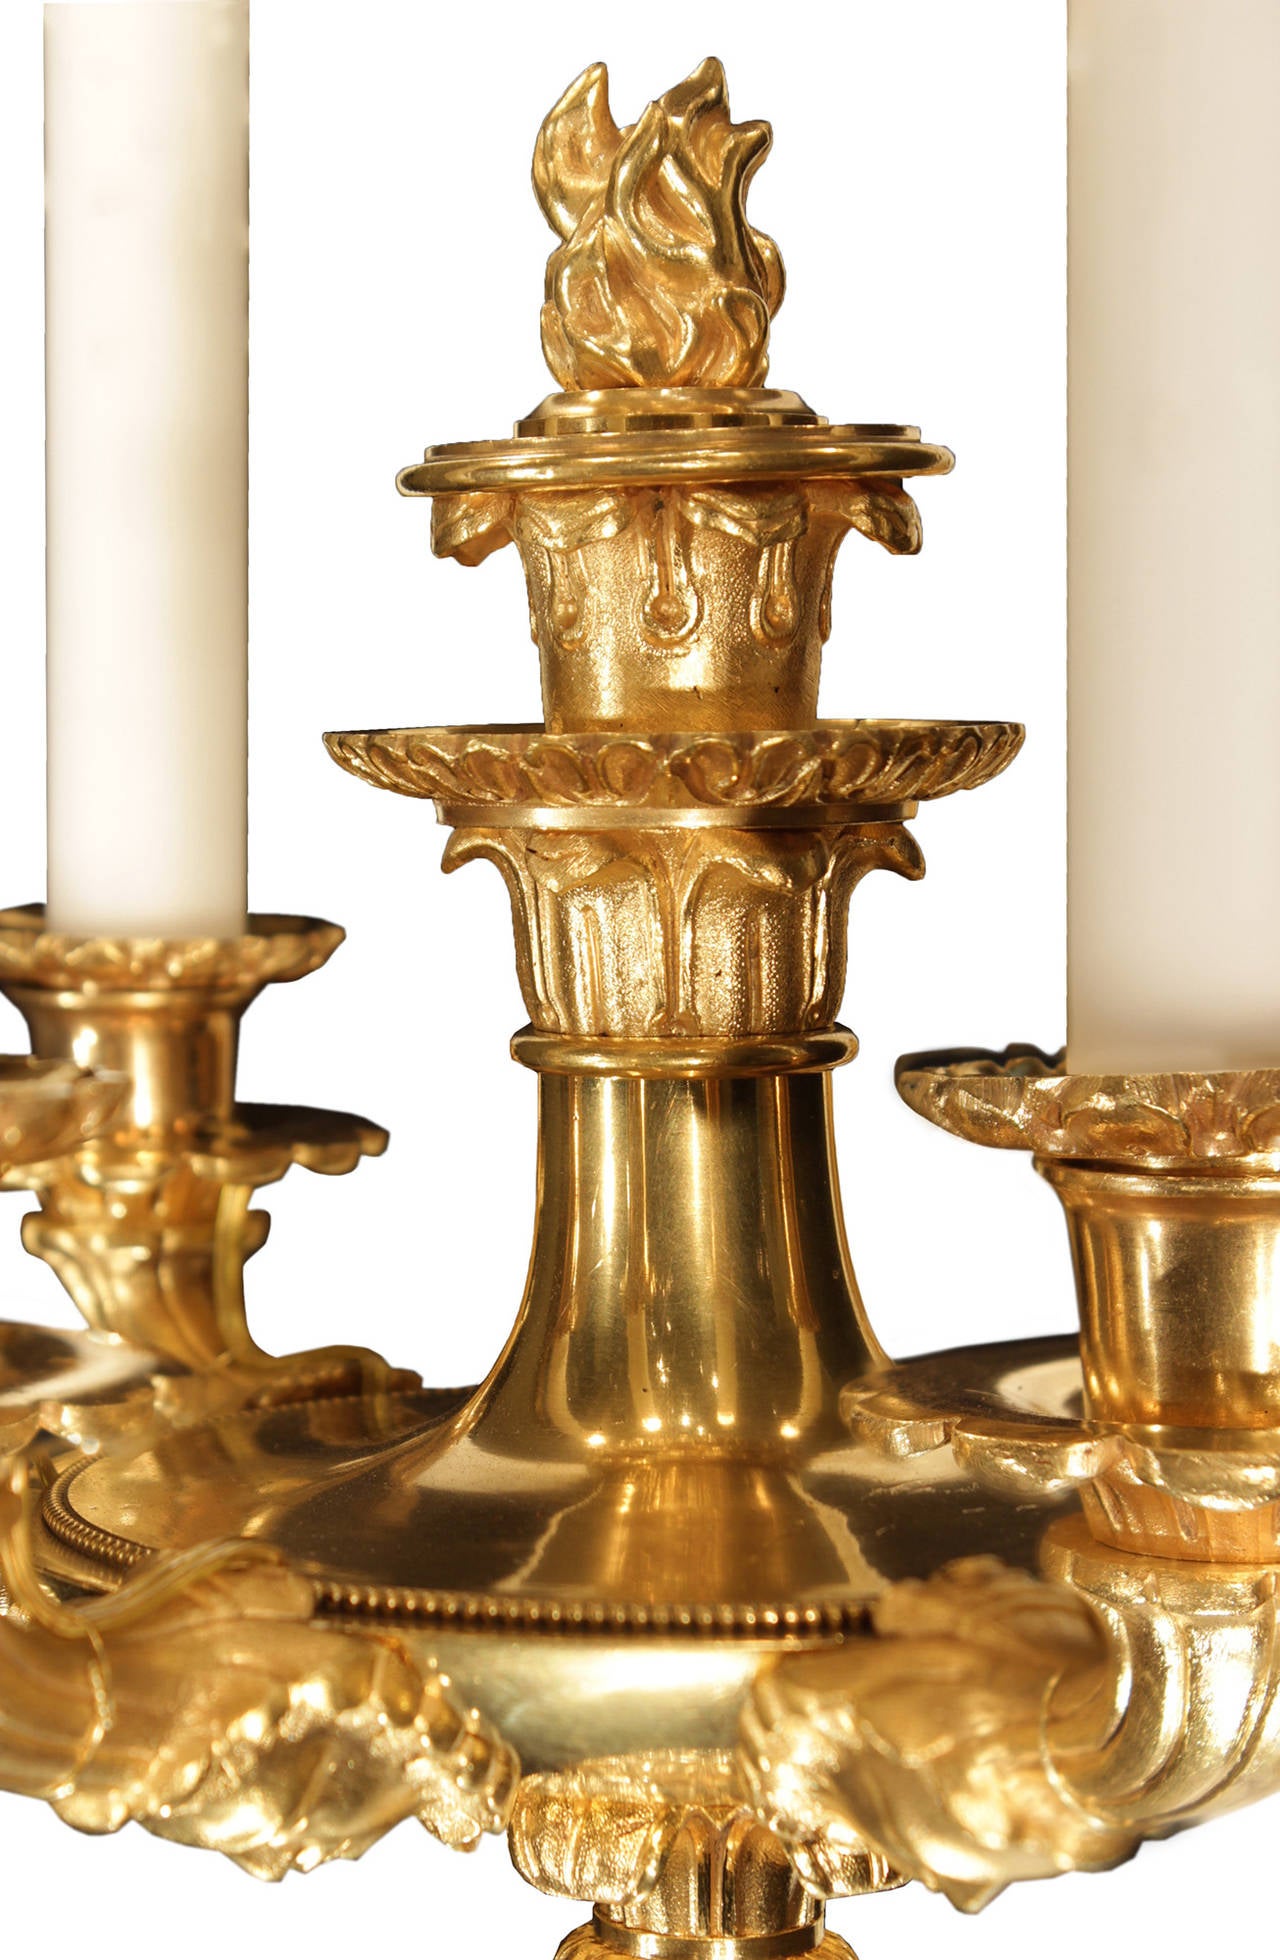 A stunning set of four French 19th century Charles X period ormolu sconces. Each sconce is centered by a richly chased bottom acorn finial. At the base of each of the five arms are wonderful and high detailed faces leading up the reeded supports to